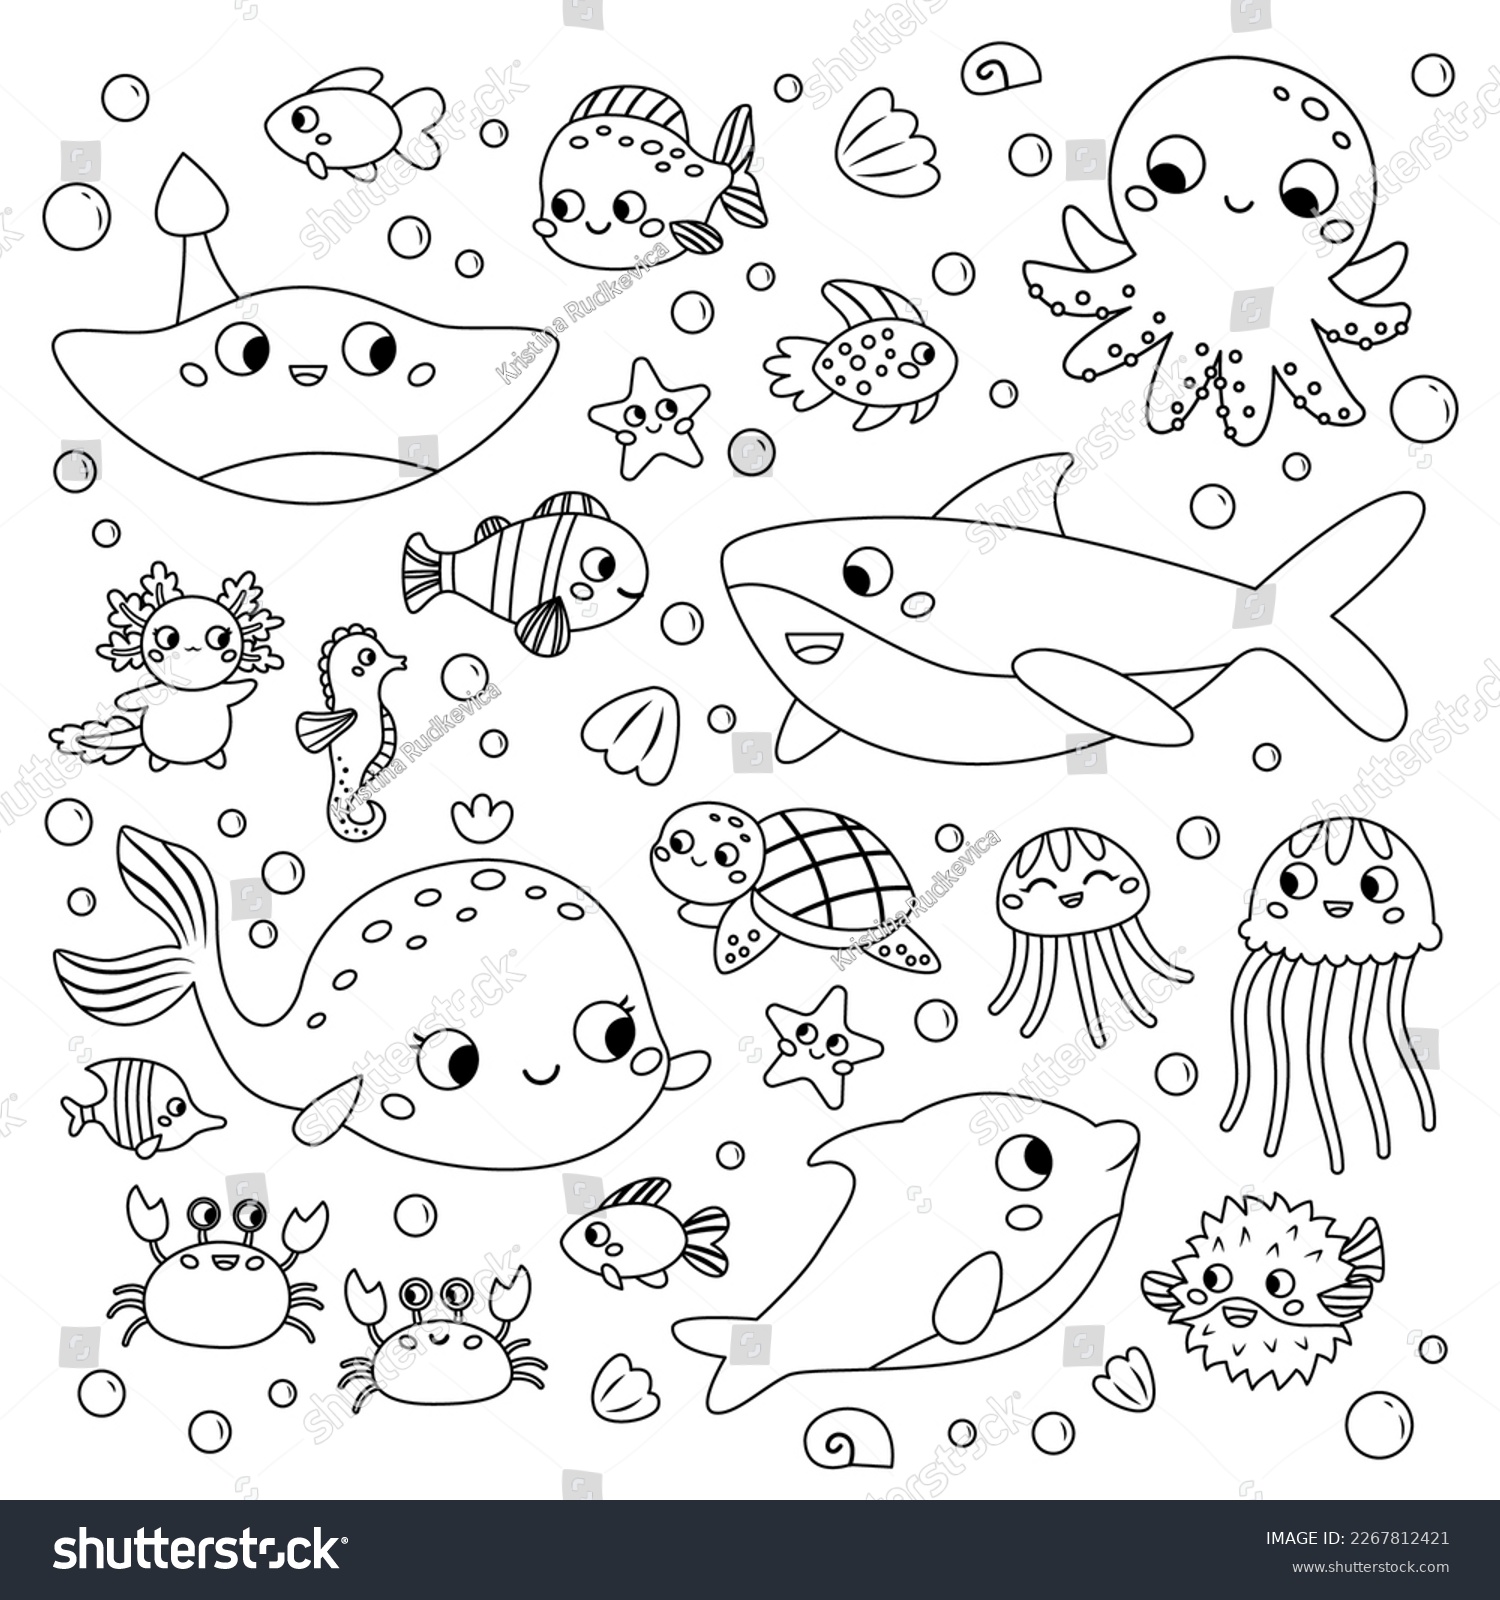 Sea animals outline images stock photos d objects vectors